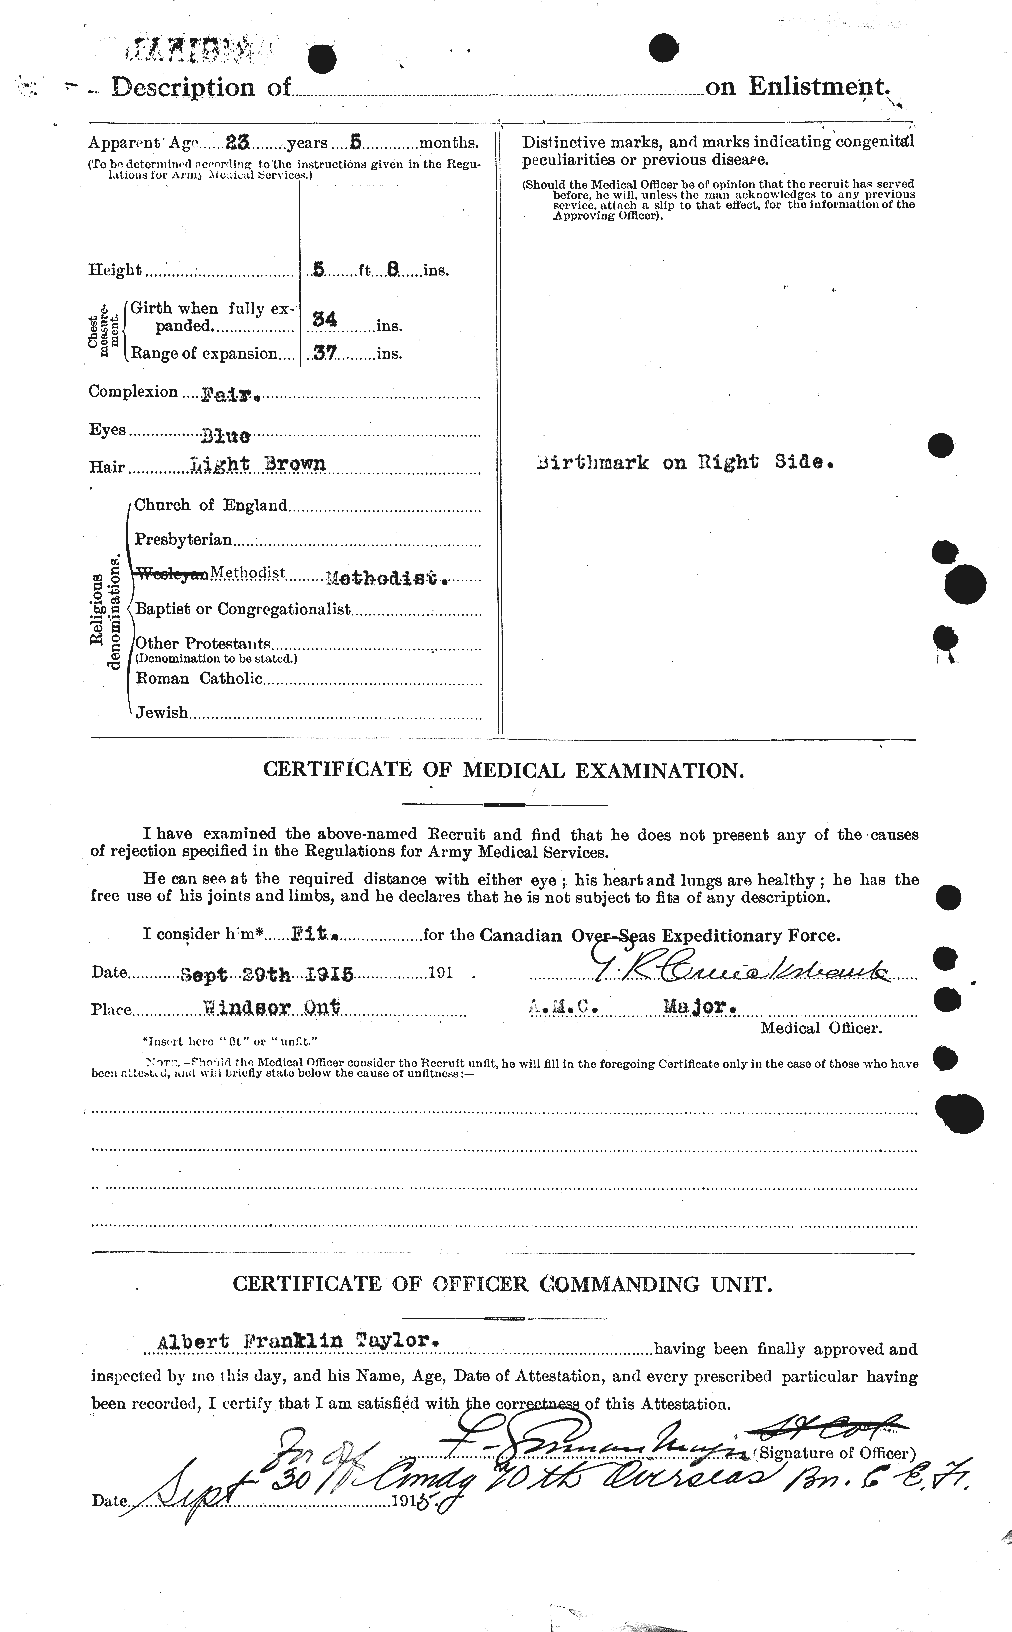 Personnel Records of the First World War - CEF 626111b